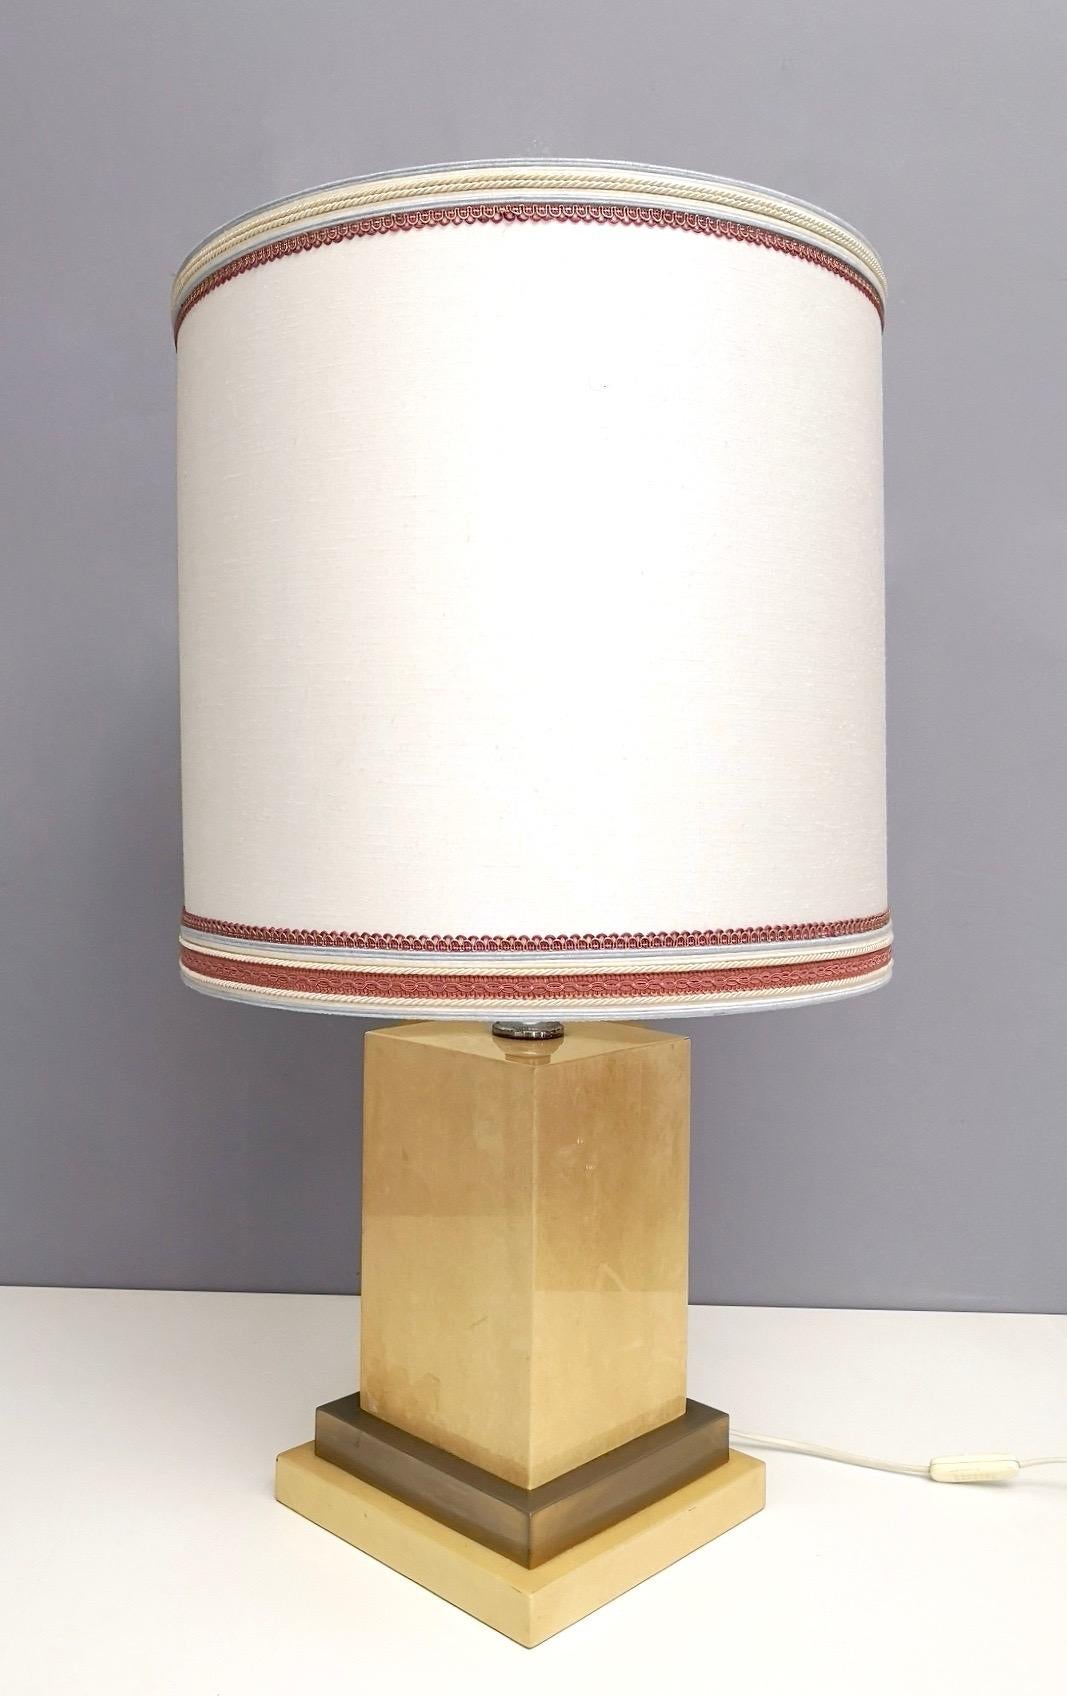 Mid-20th Century Parchment and Brass Table Lamp by Aldo Tura, Italy 1960s-1970s